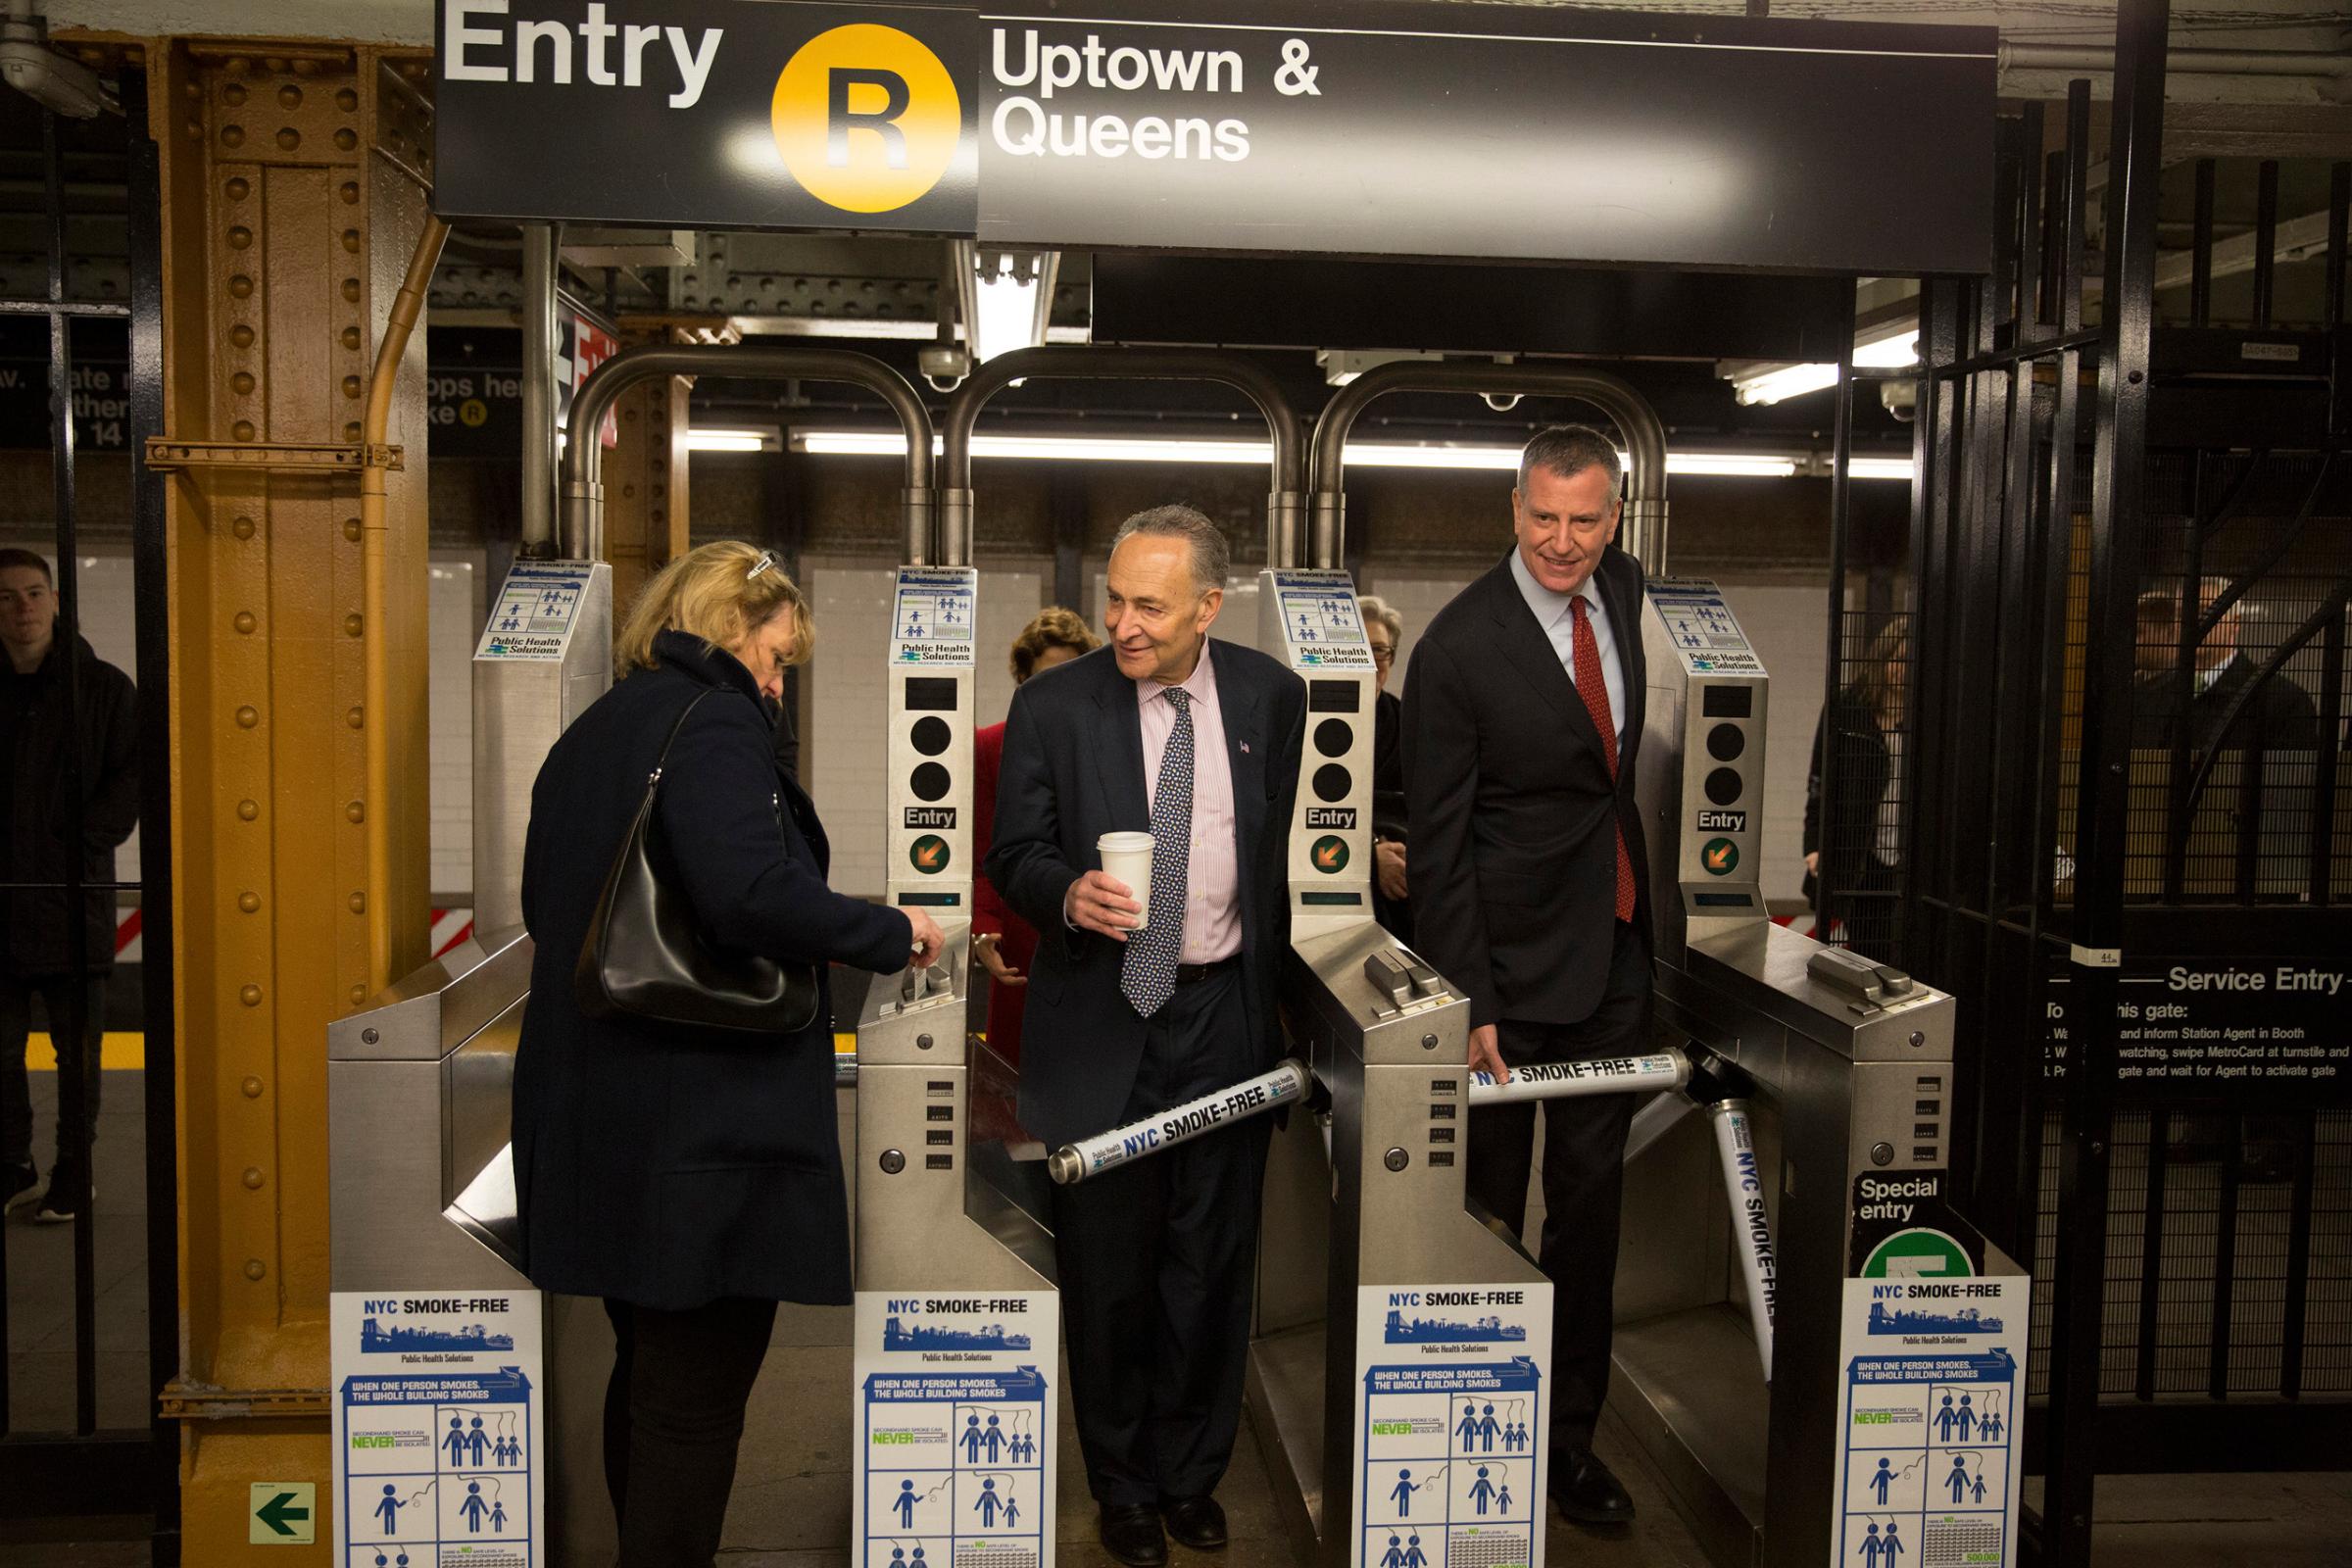 New York City Mayor Bill de Blasio, right, and Sen. Schumer. exit the subway system after riding the train to City Hall in New York, April 9, 2015. De Blasio and Schumer took the trip as part of National Stand Up for Transportation Day, designed to call attention to the need for a long-term, sustainable and reliable federal transportation funding bill.